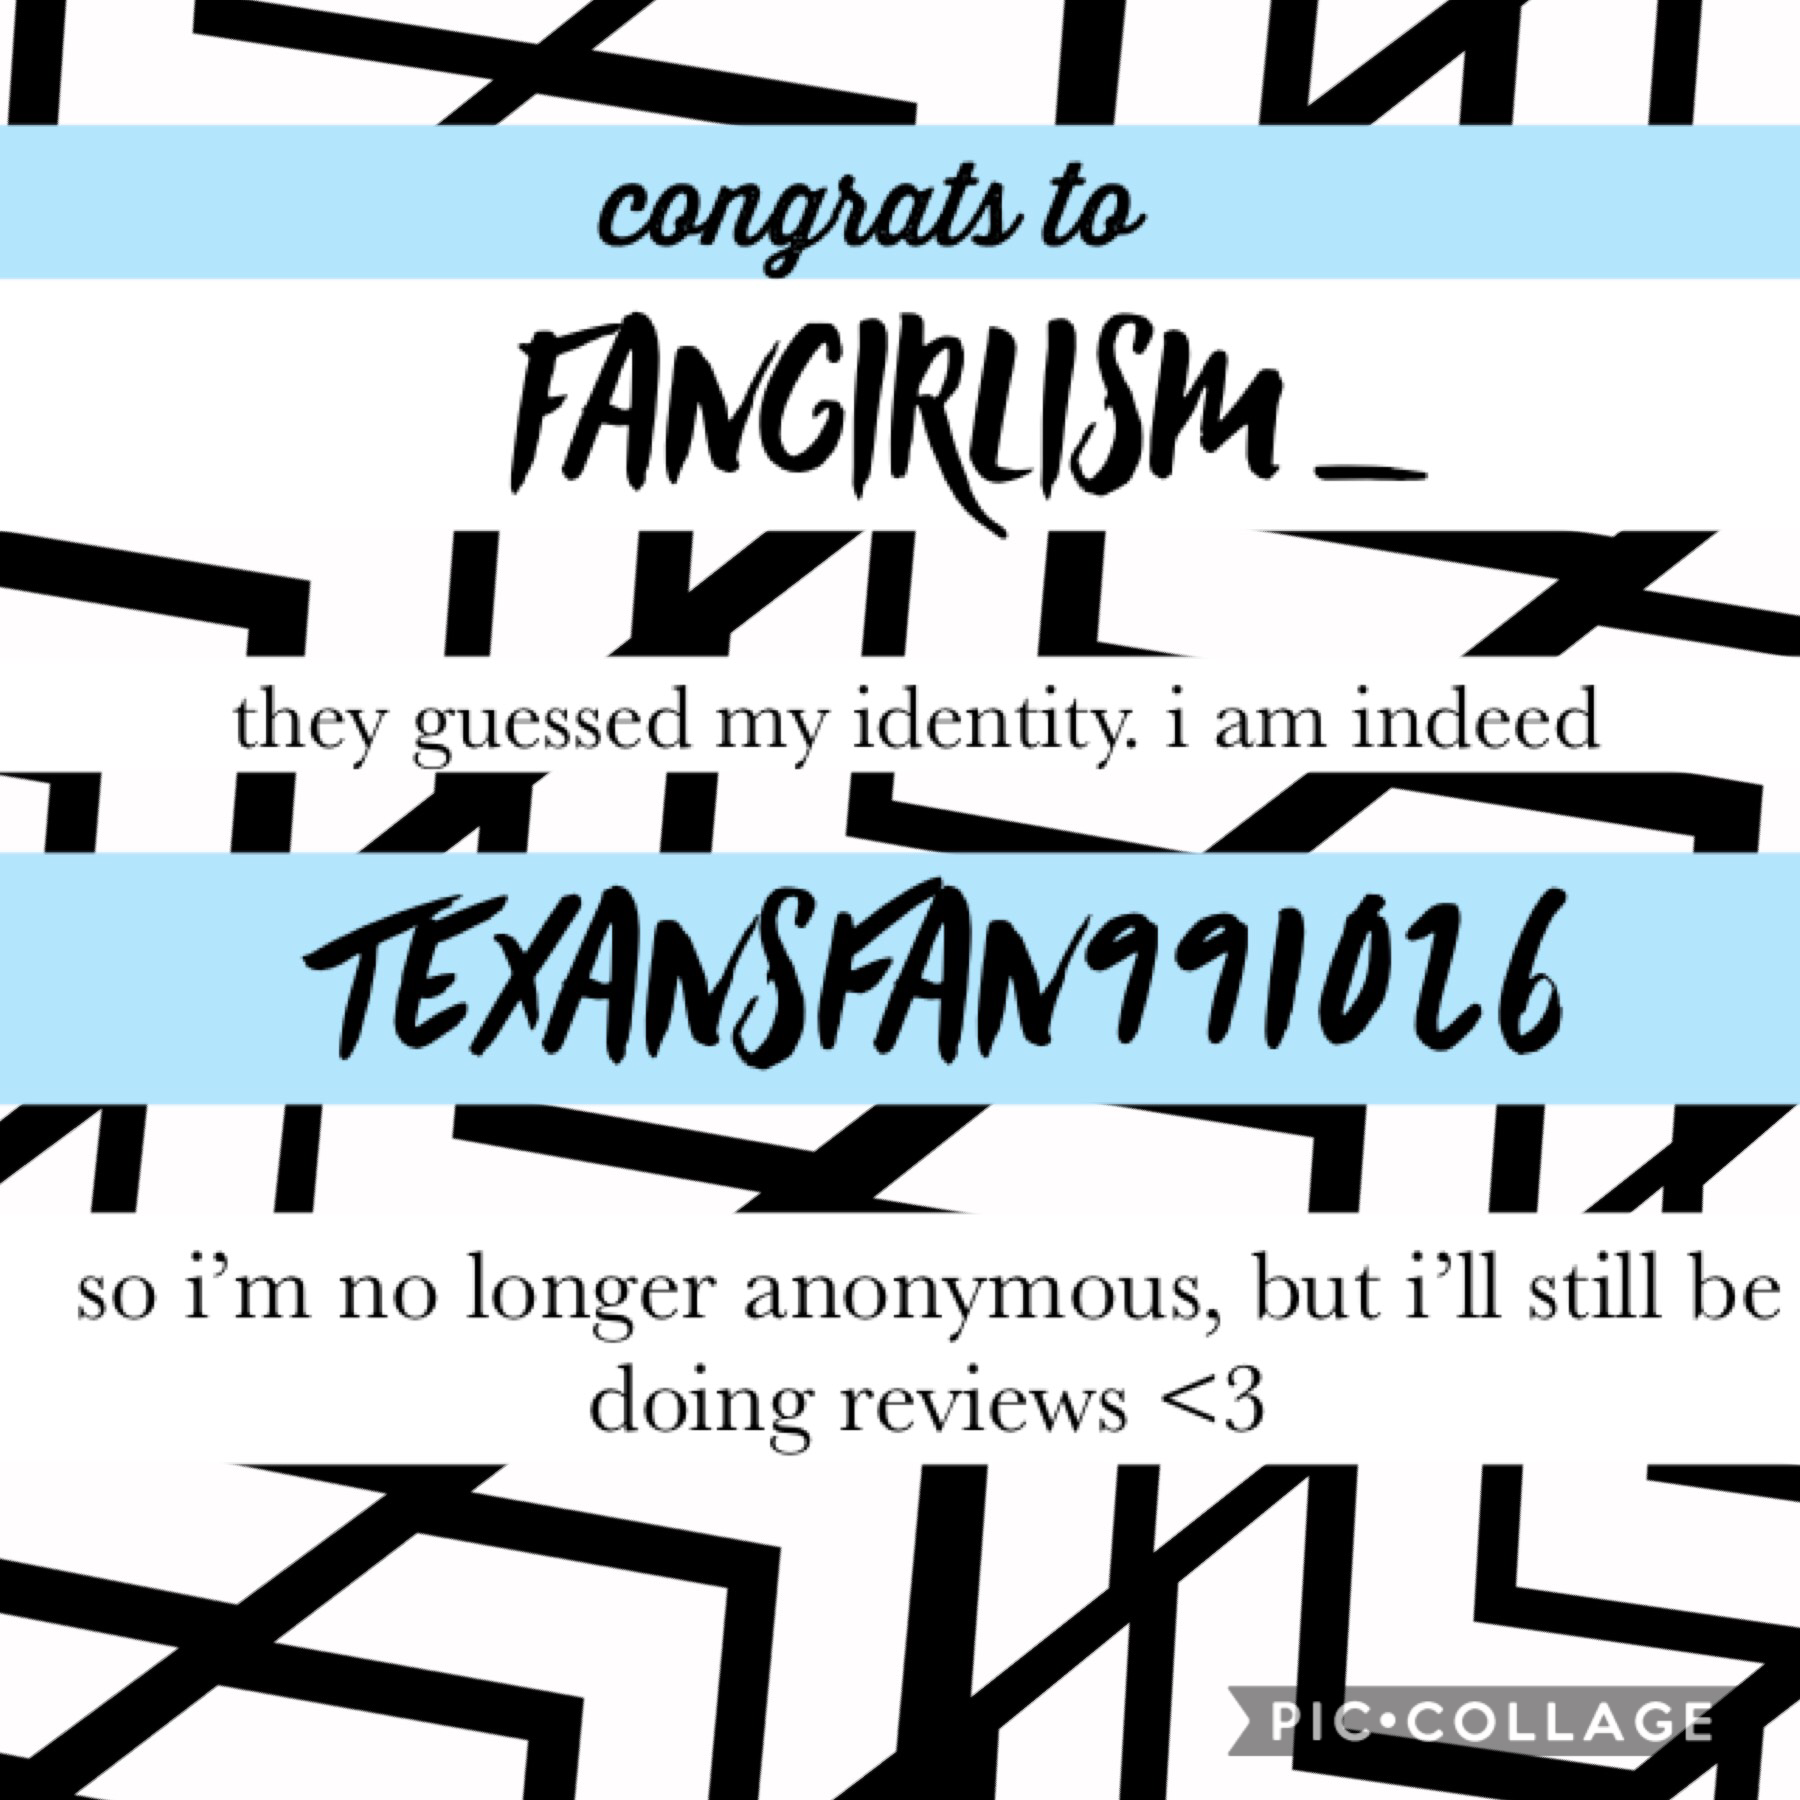 I’ve been exposed!!
Congrats Fangirlism_. You’ll get a fanpage! 